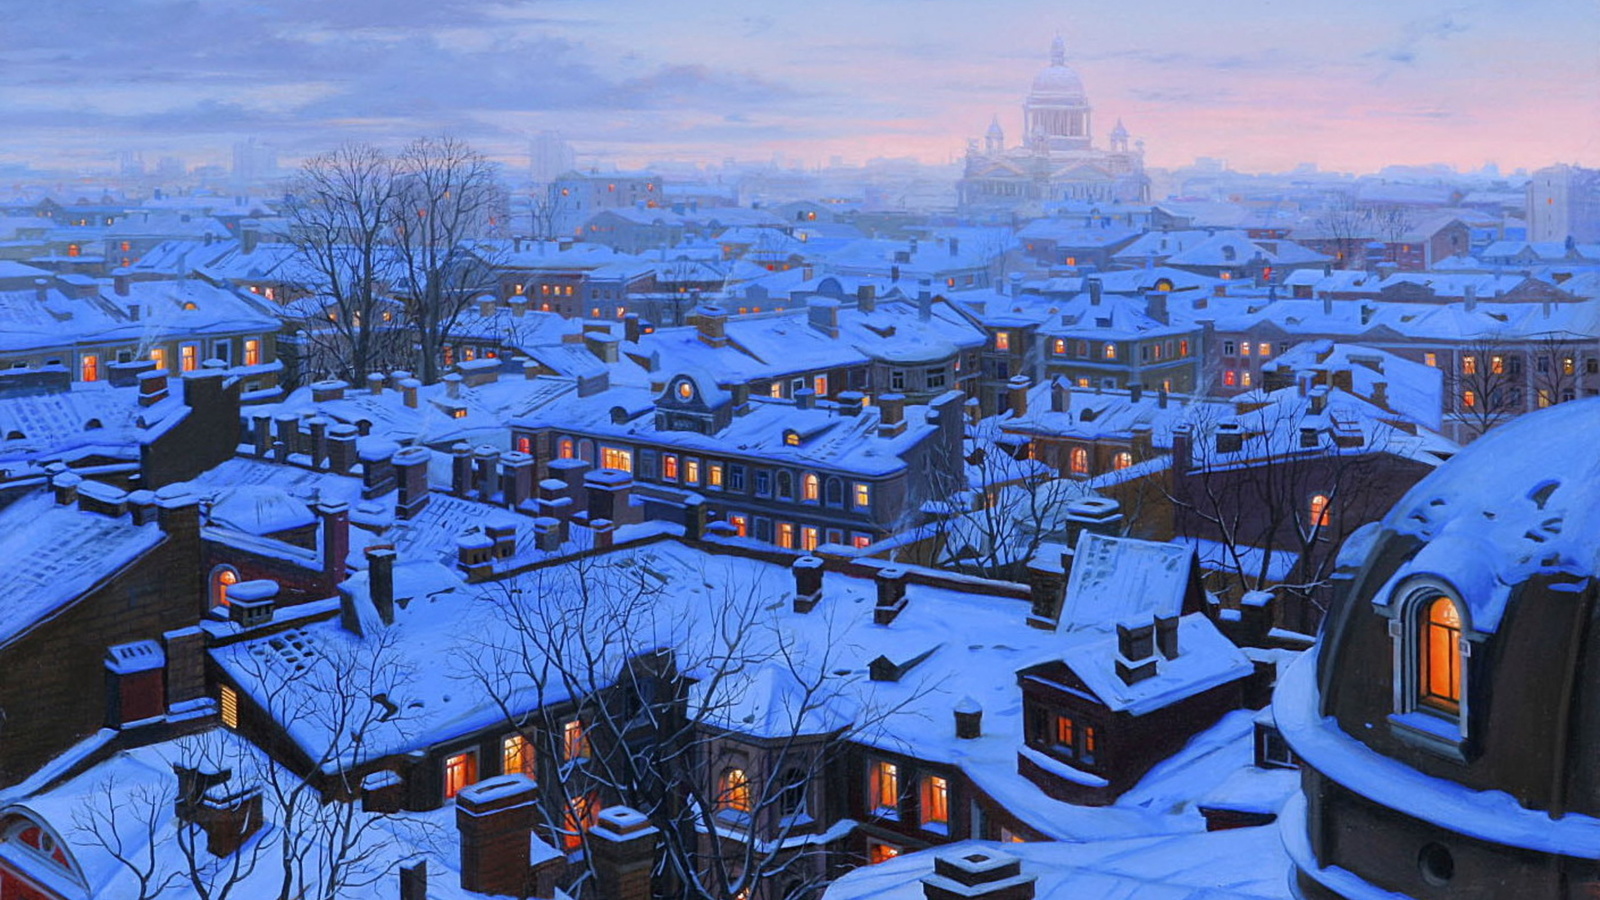 houses, roofs, st petersburg, st petersburg roofs, Eugeny lushpin, snow, winter, evening